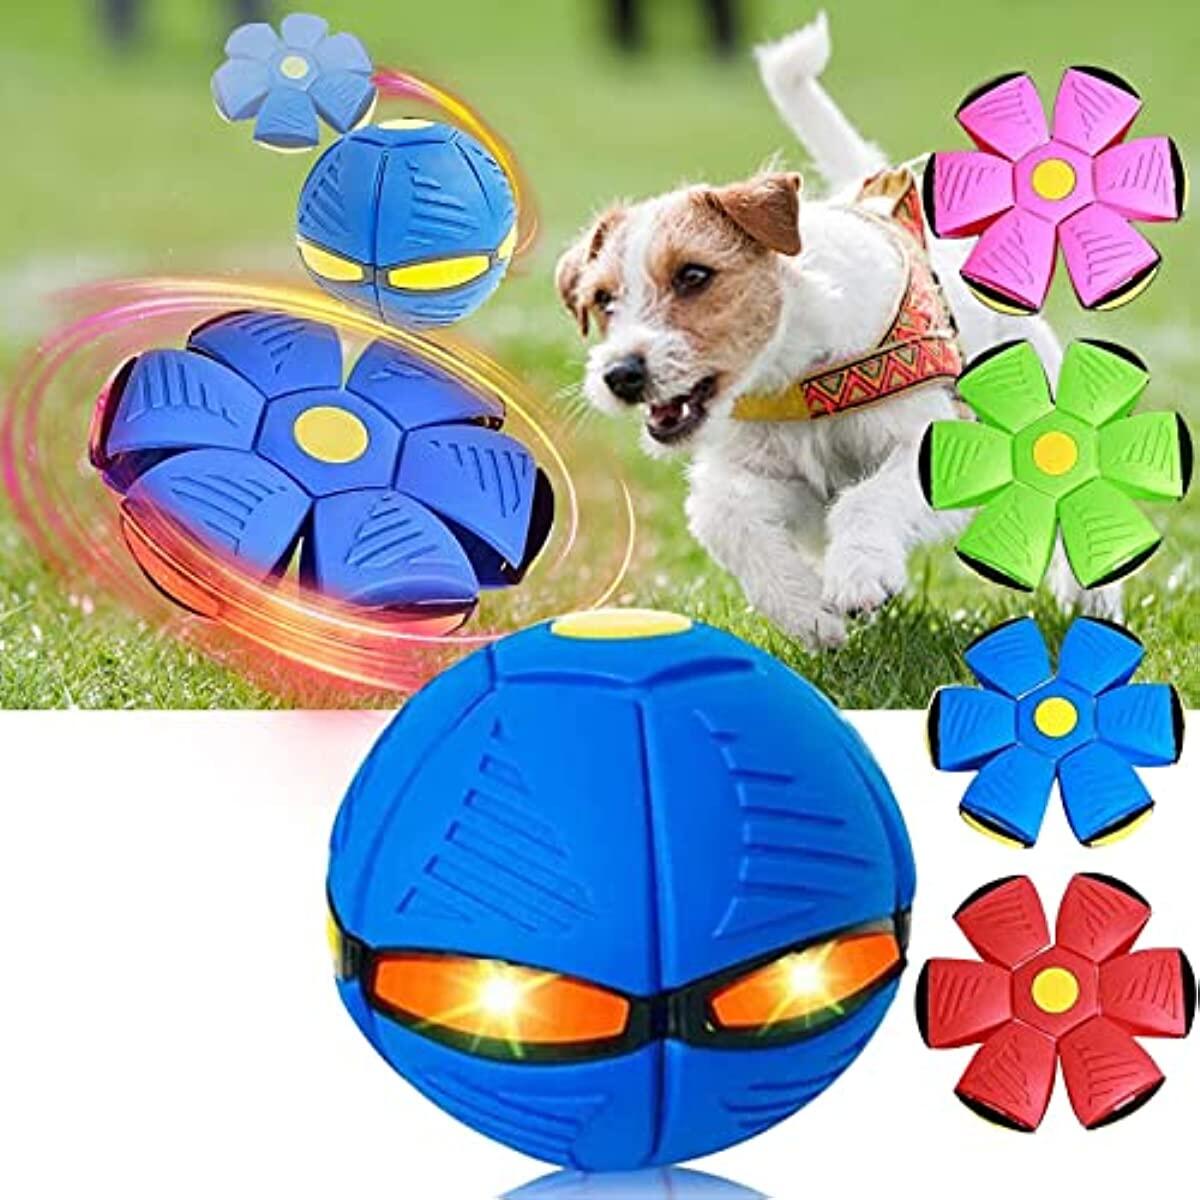 Magic UFO Ball,Portable Glowing Flying Toys Creative Fly Saucer Stomp Magic  Balls,Decompression Flying Flat Throw Disc Balls Toy for Childrens Outdoor